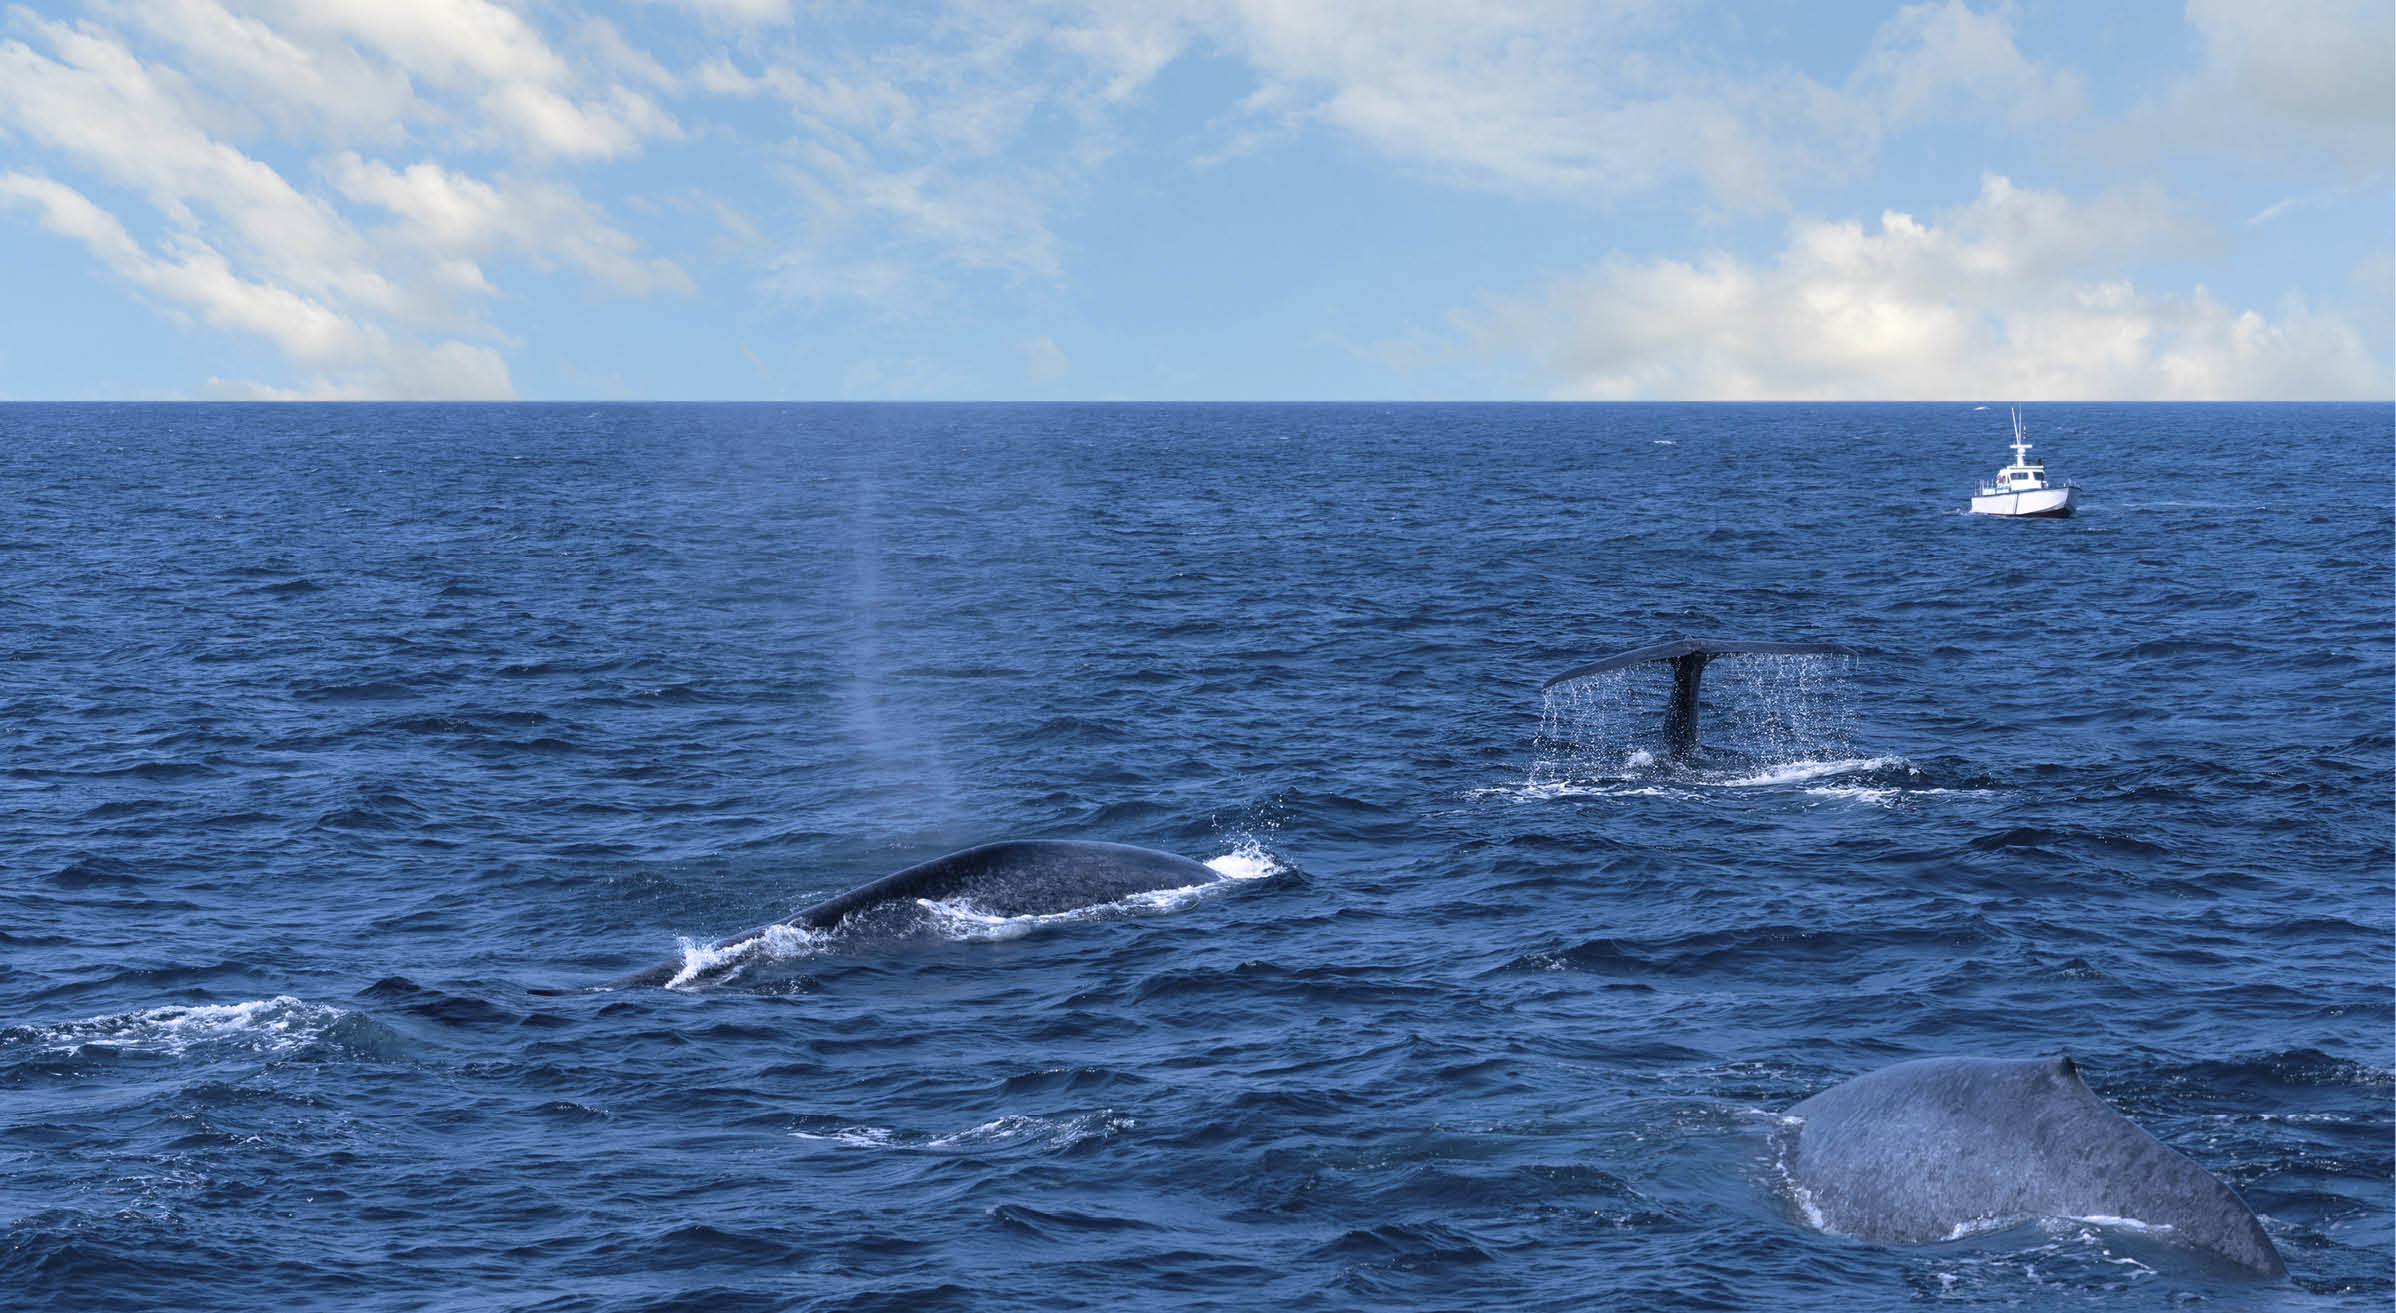 Whales sailing in the Indian ocean, Sri Lanka